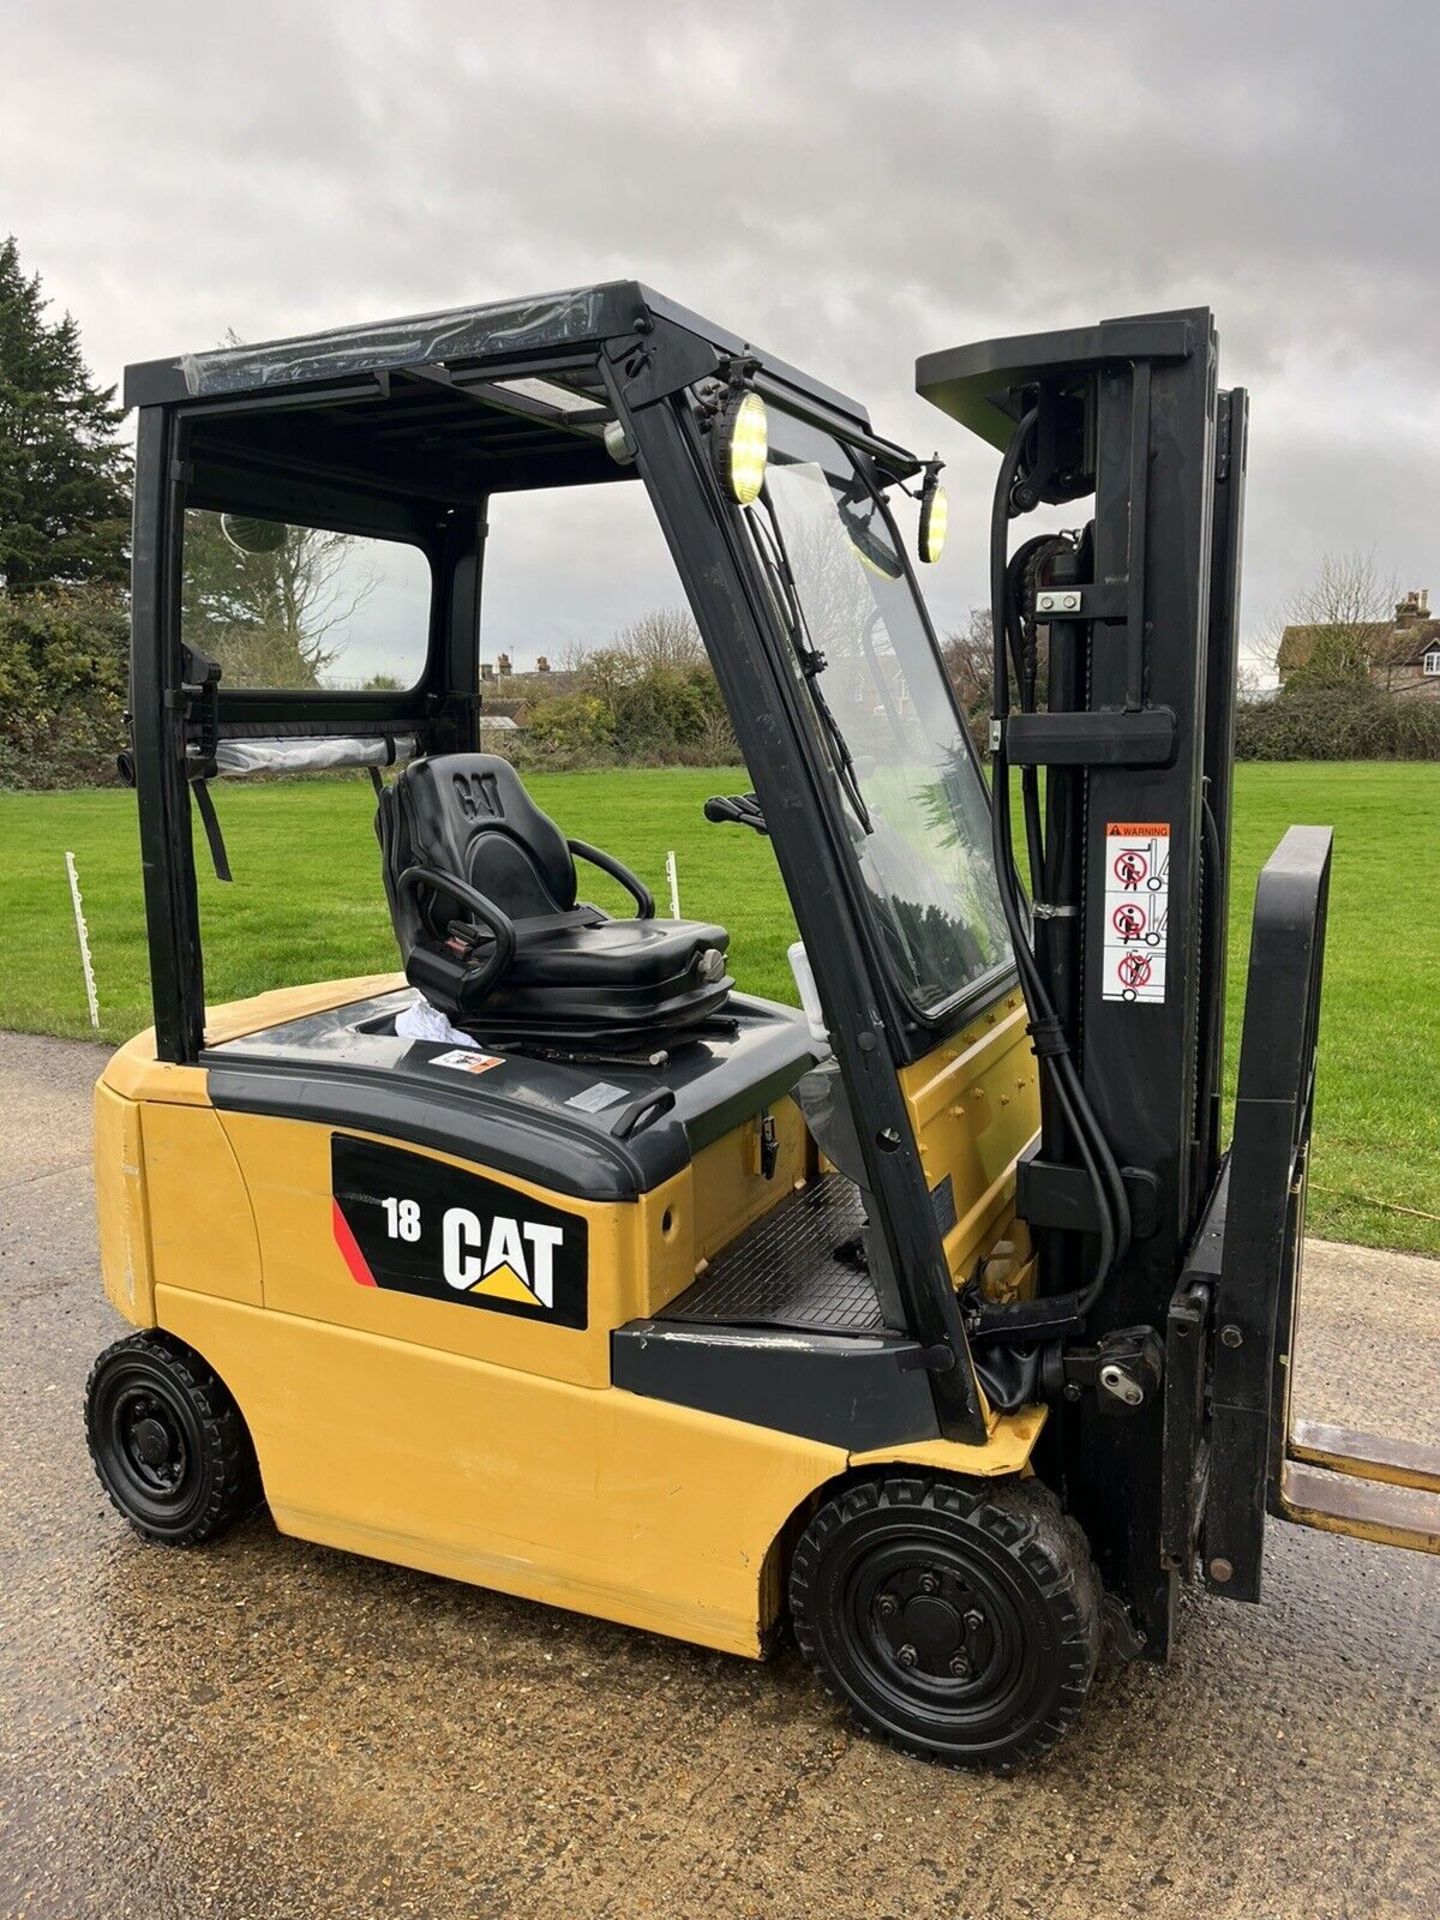 2012, CATERPILLAR 1.8 Electric Forklift Truck (Container Spec) - Image 7 of 7